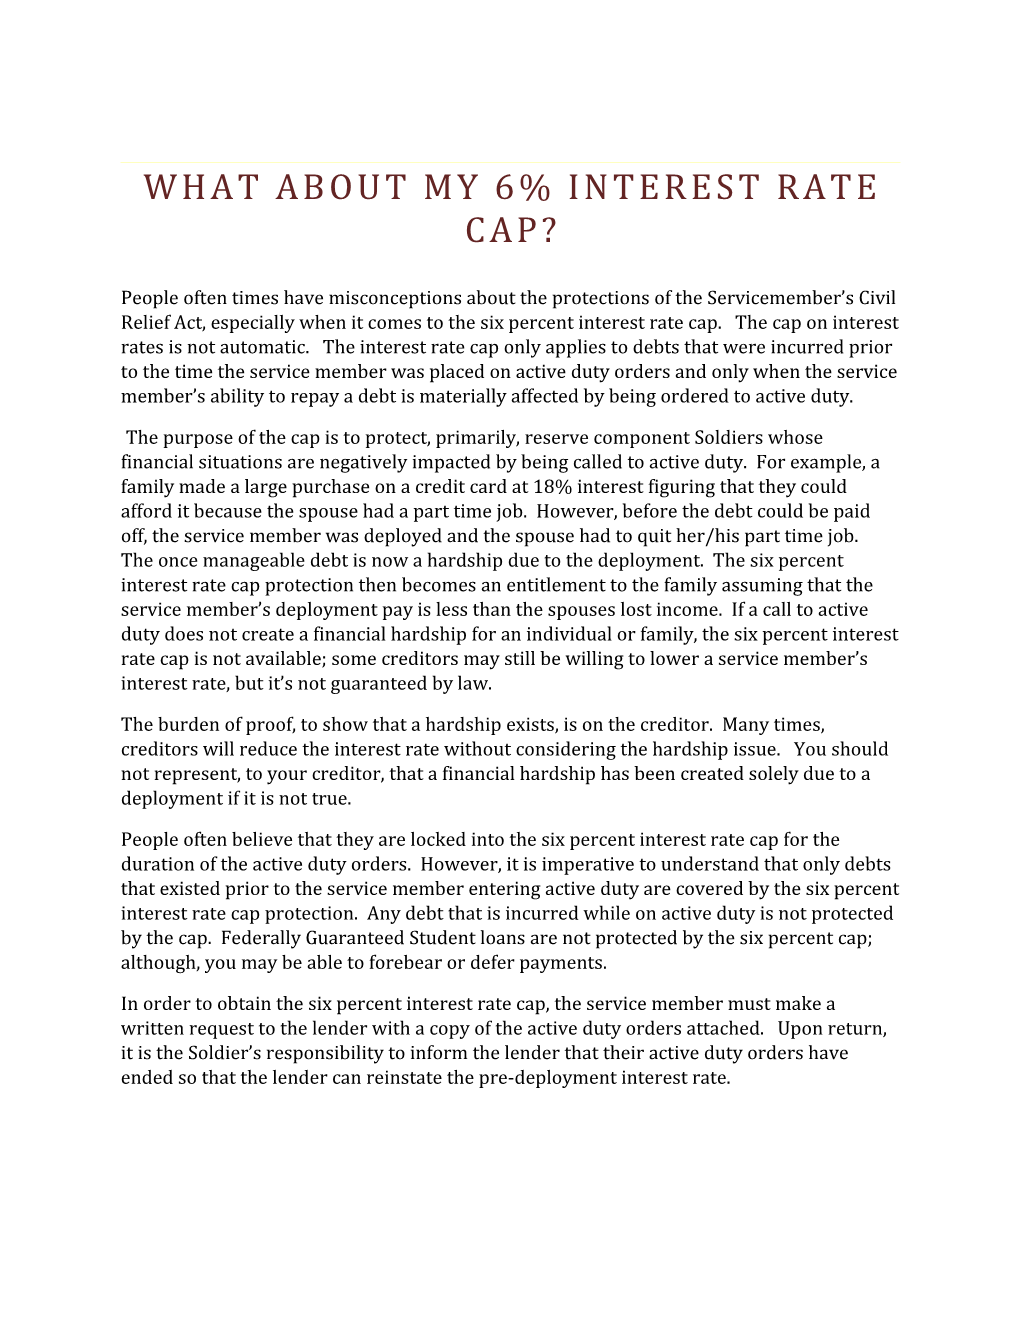 What About My 6% Interest Rate Cap?